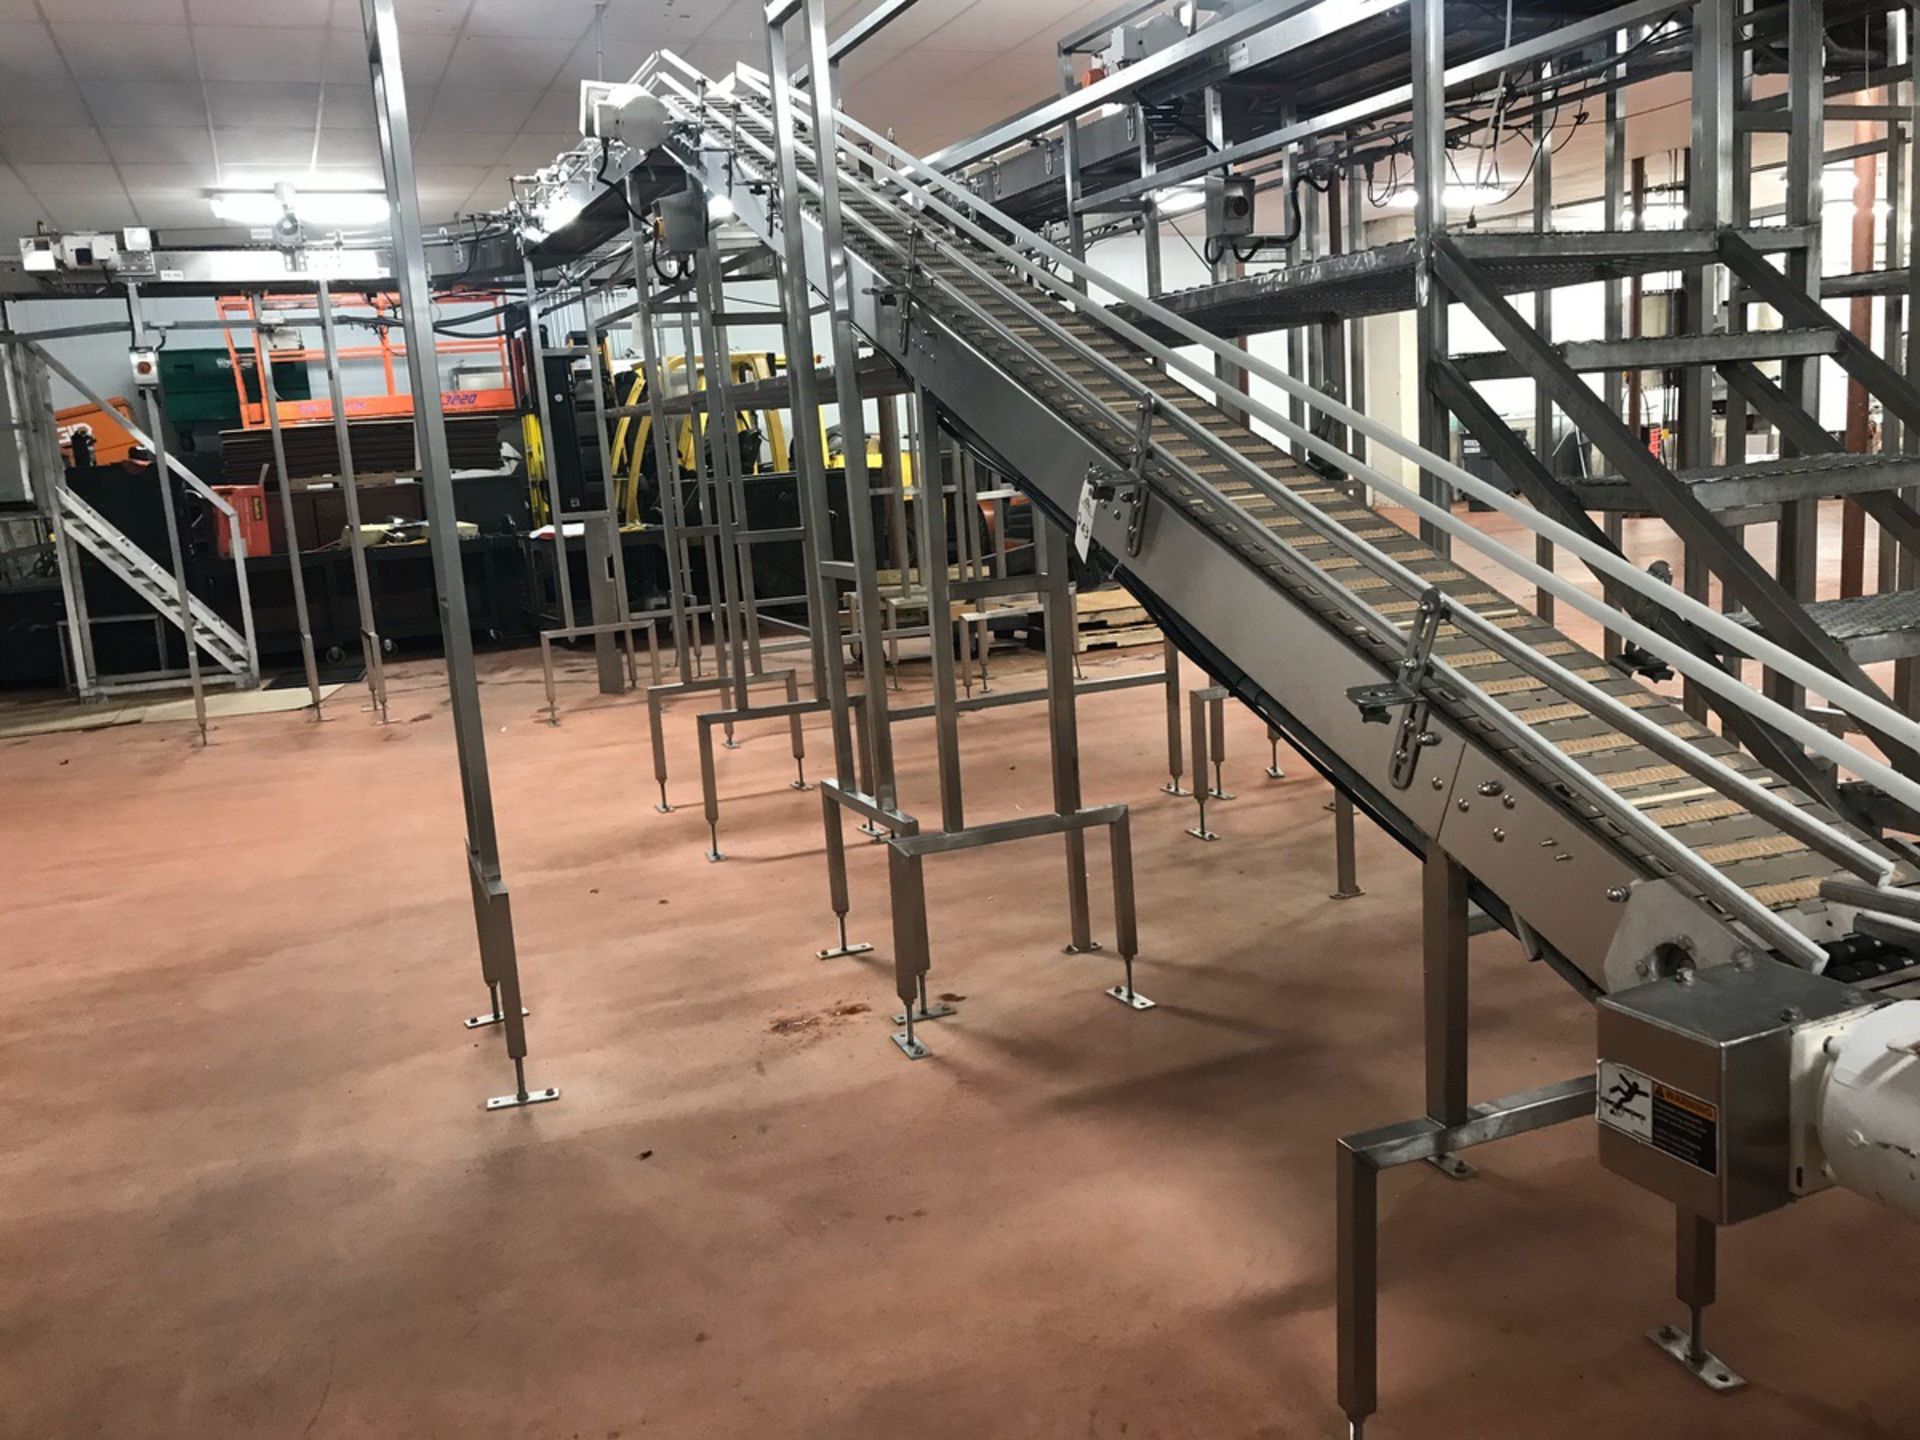 Stainless Steel Incline Conveyor, Approx 12in Wide x 16 ft Long | Rig Fee: $250